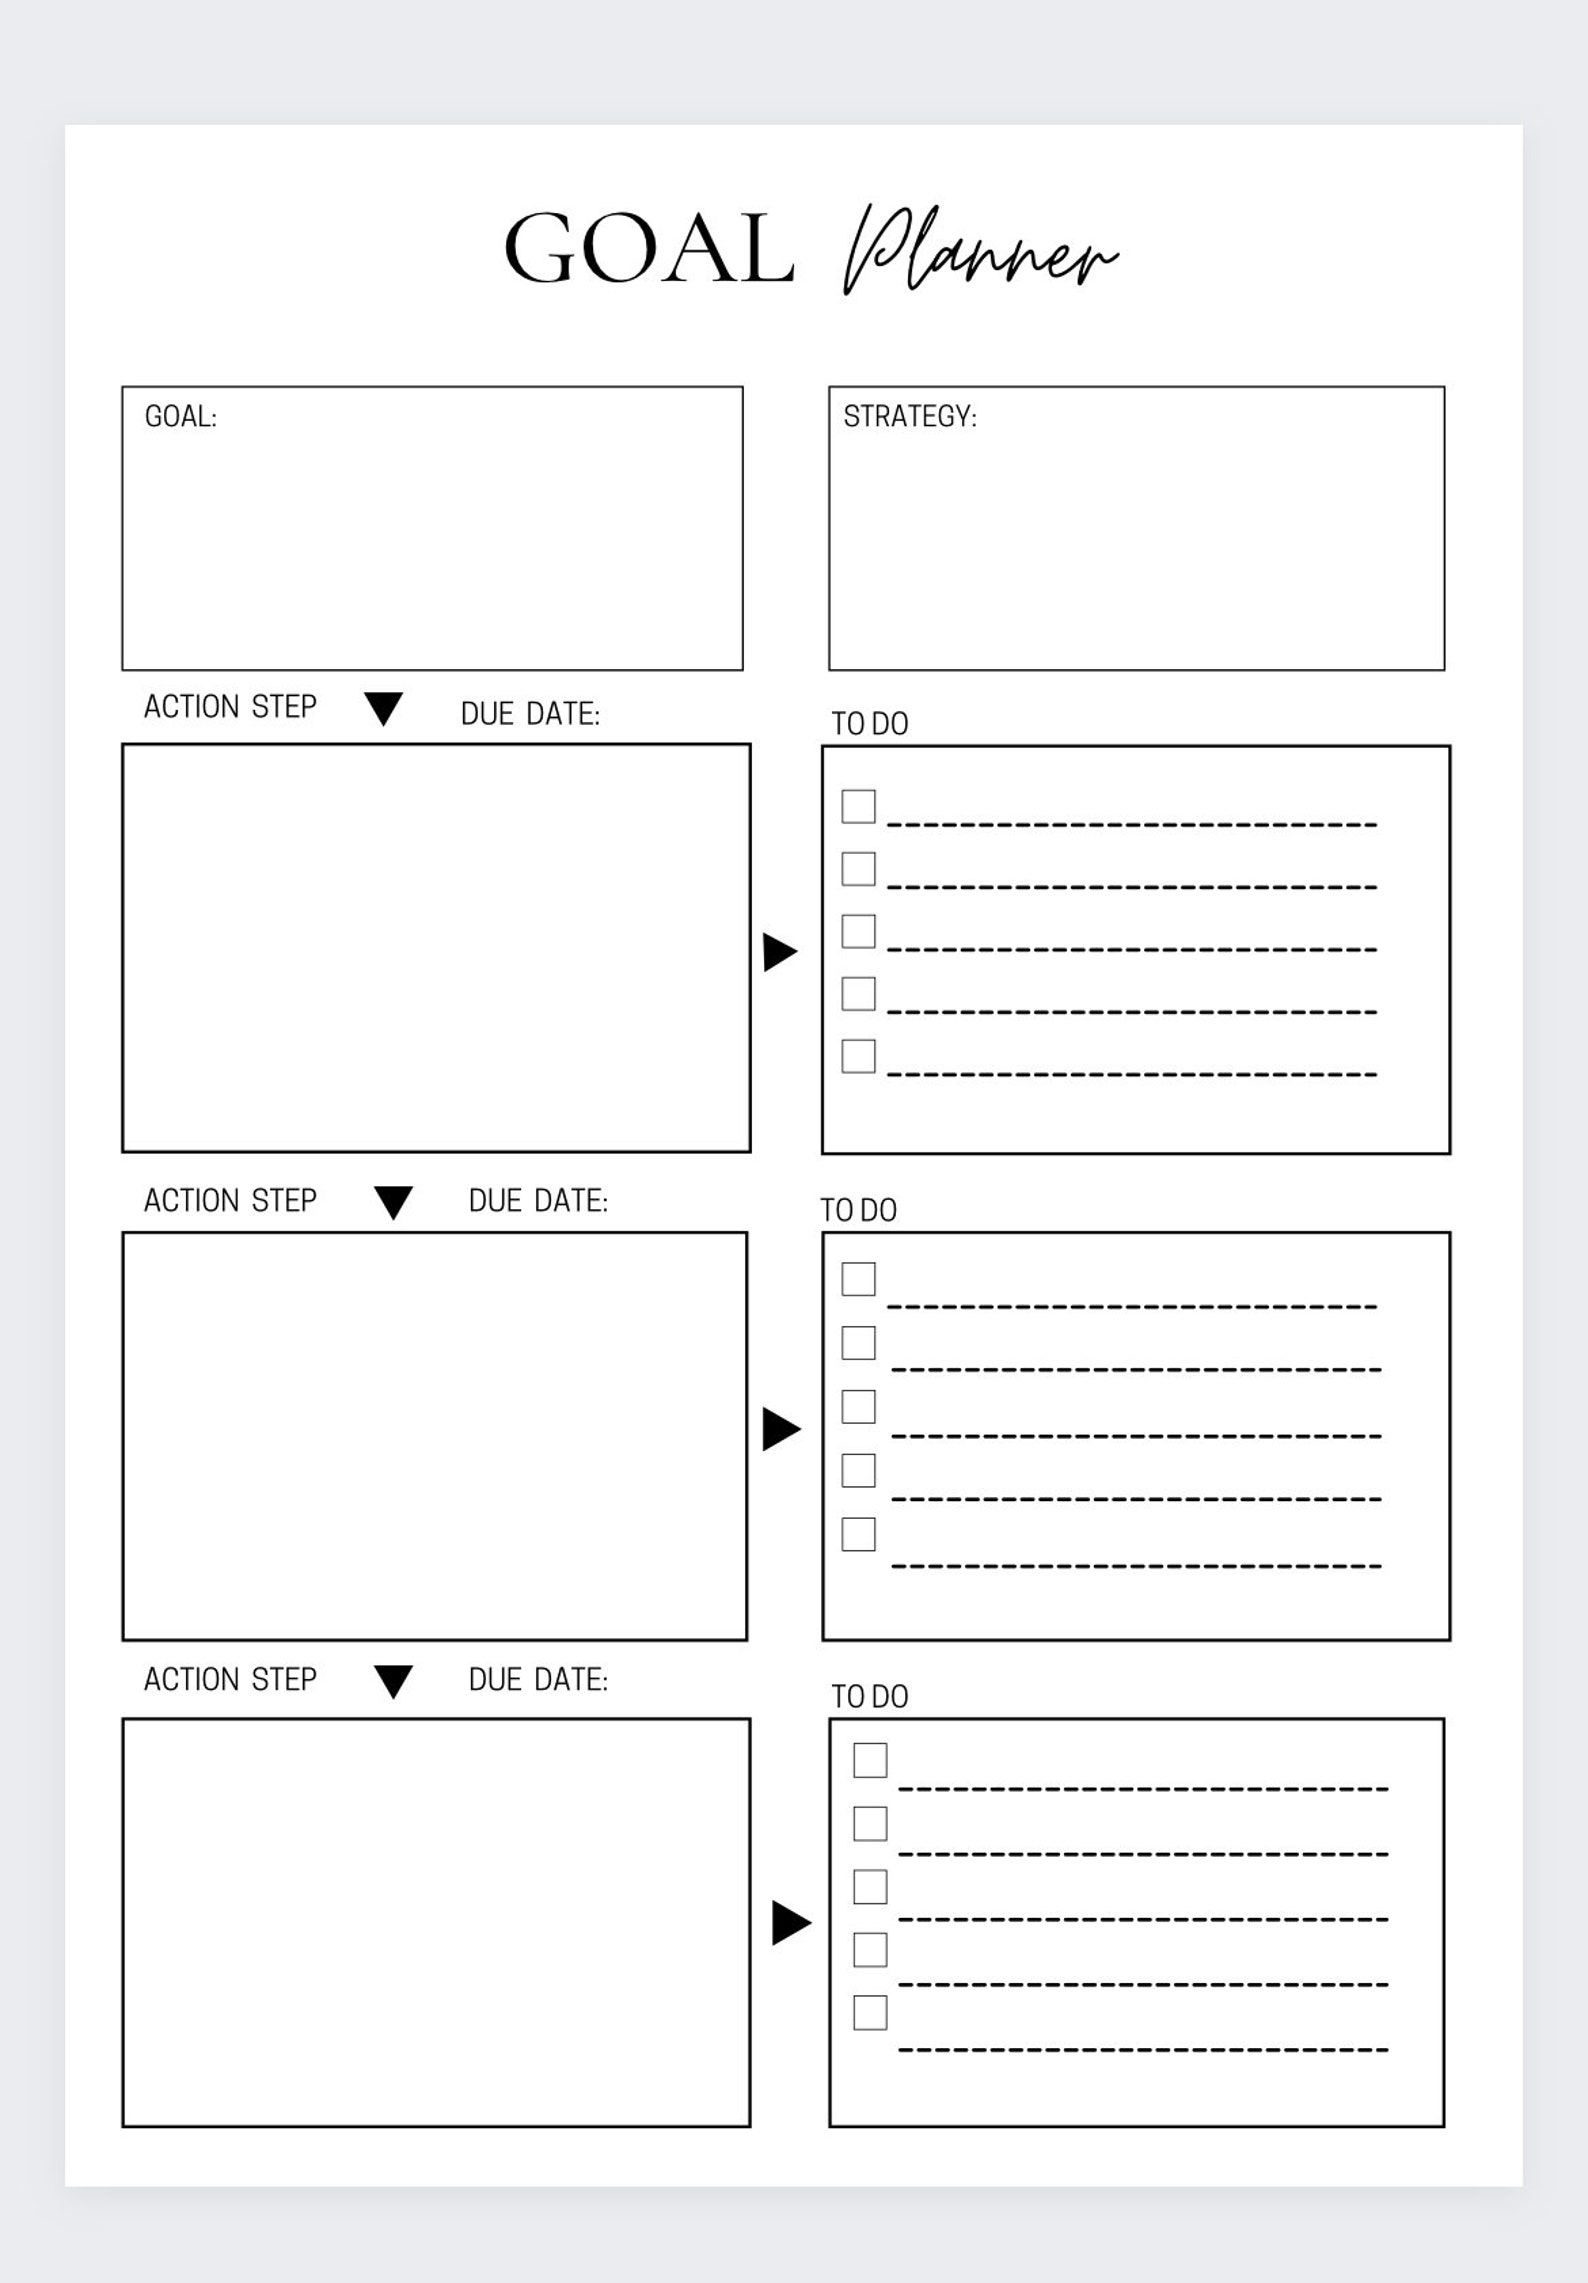 Goal Planner Template, Organizer Pages, Goal Tracker, Goal Planning ...